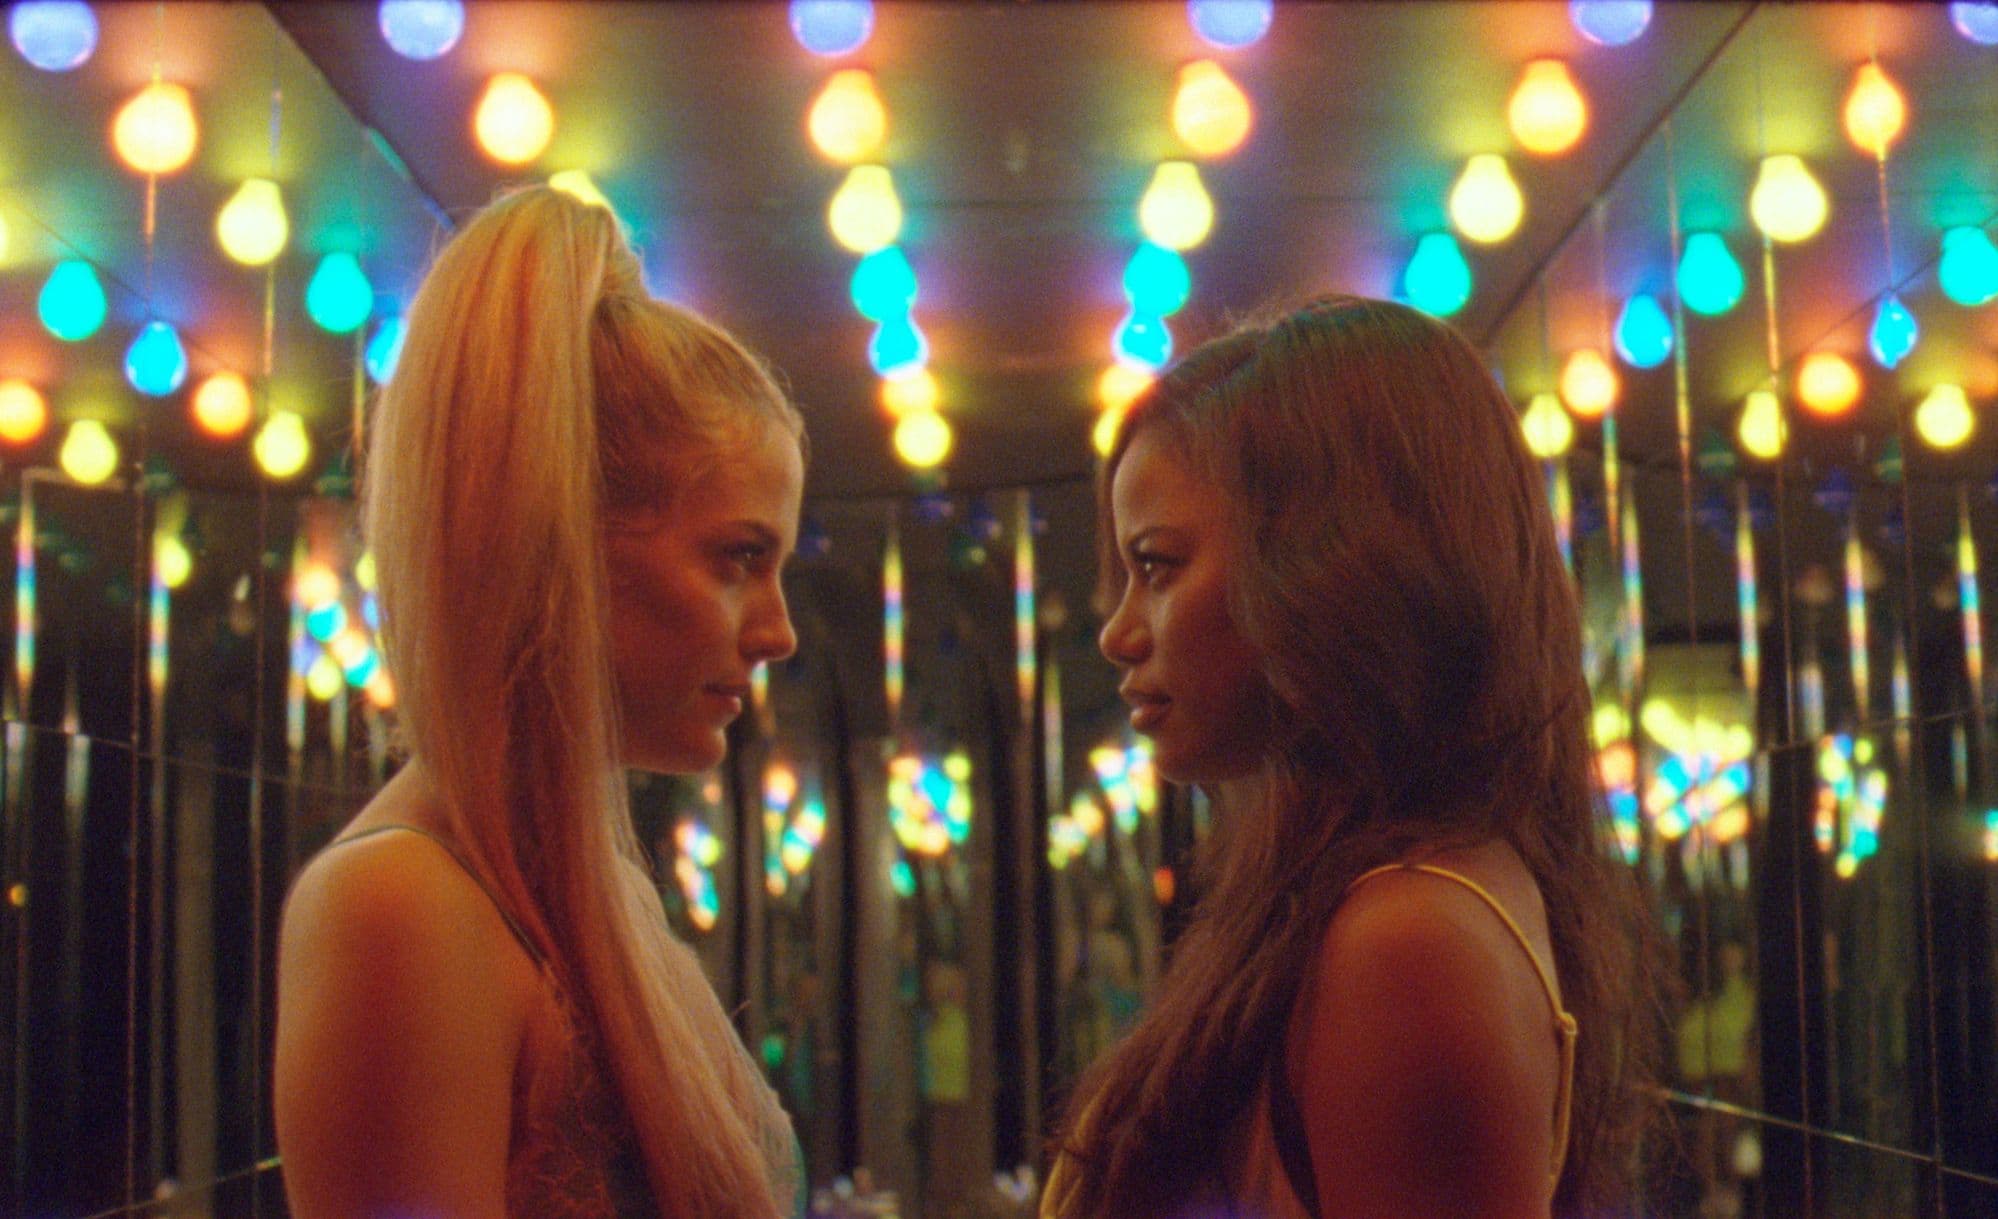 Taylour Paige (right) as Zola and Riley Keough as Stefani in &quot;Zola.&quot; (Courtesy A24)